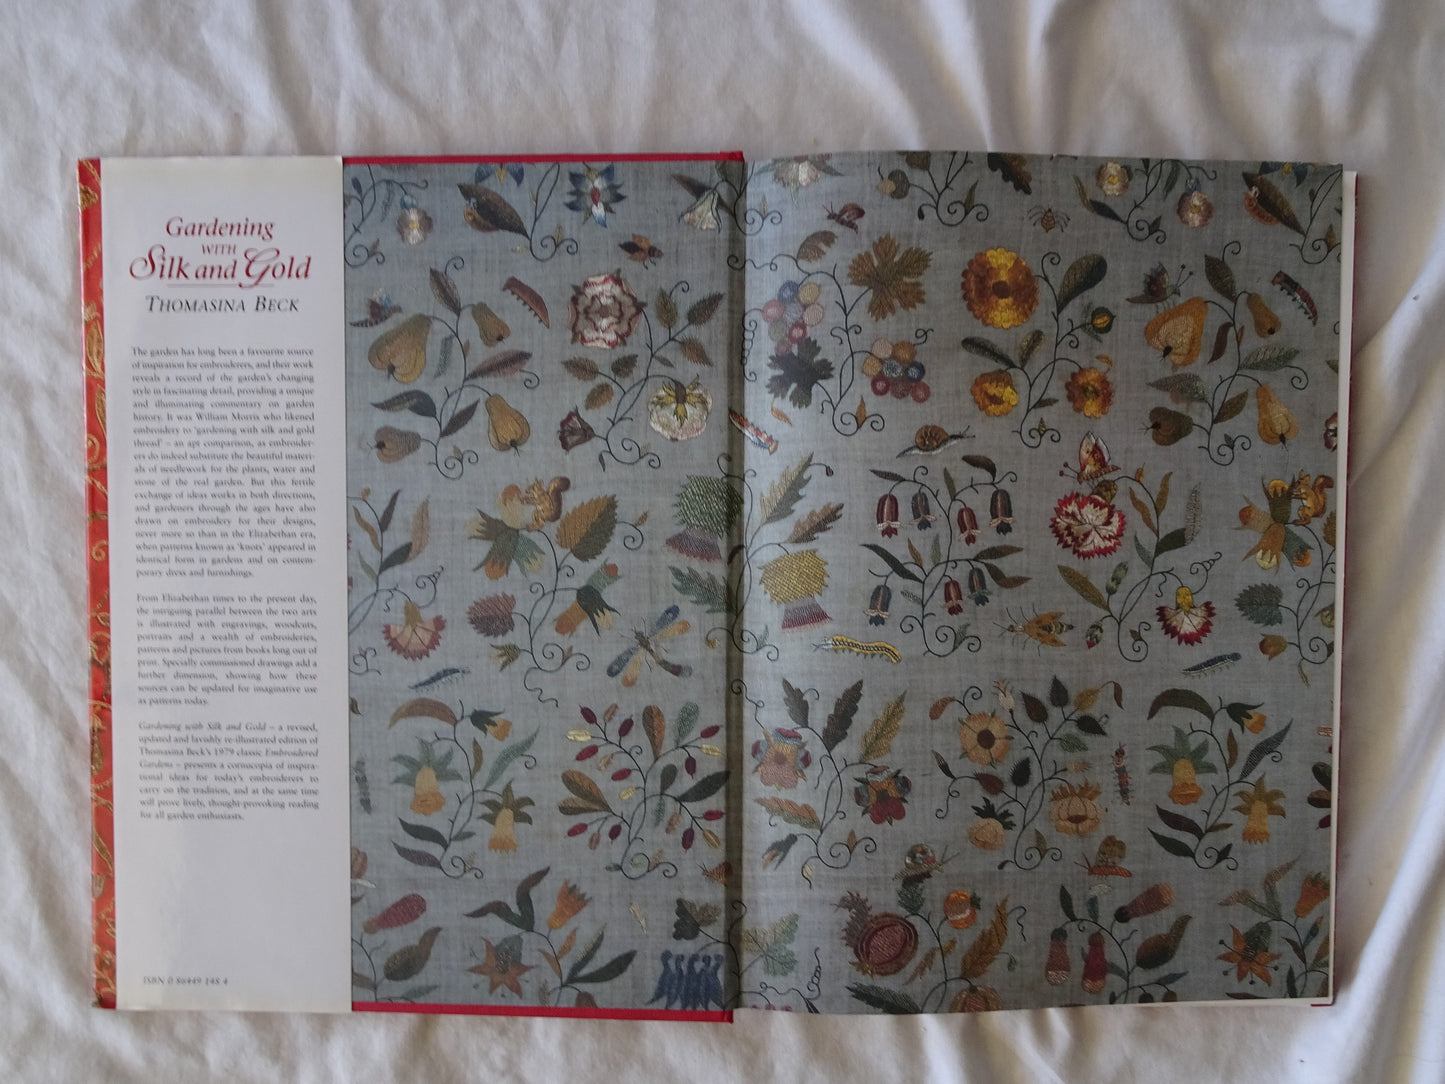 Gardening With Silk and Gold by Thomasina Beck